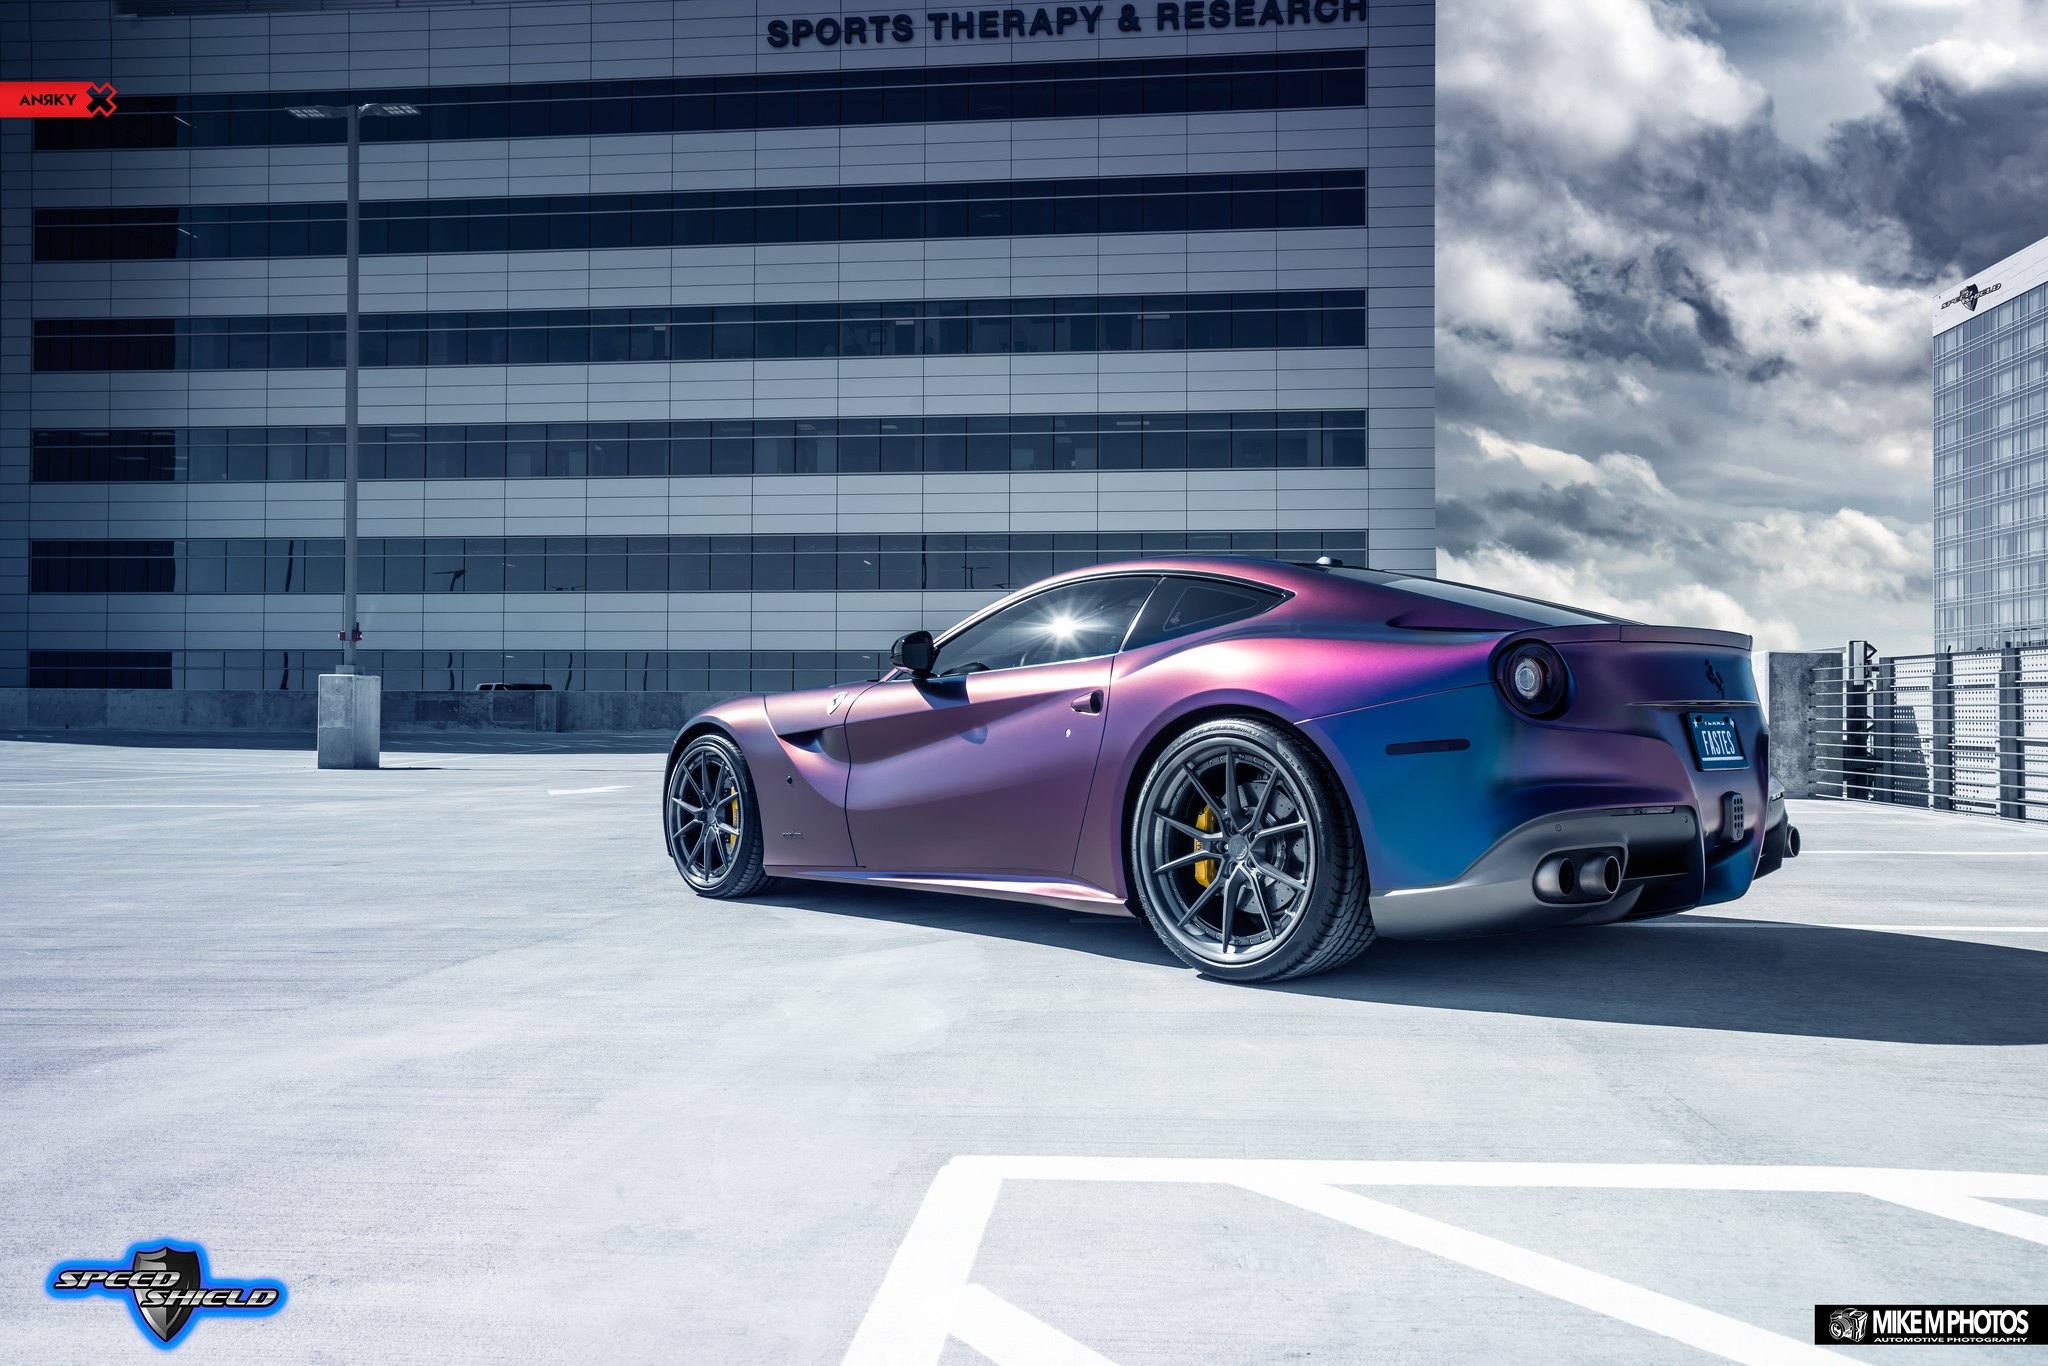 Chameleon Ferrari F12 with Aftermarket Rear Diffuser - Photo by ANRKY Wheels